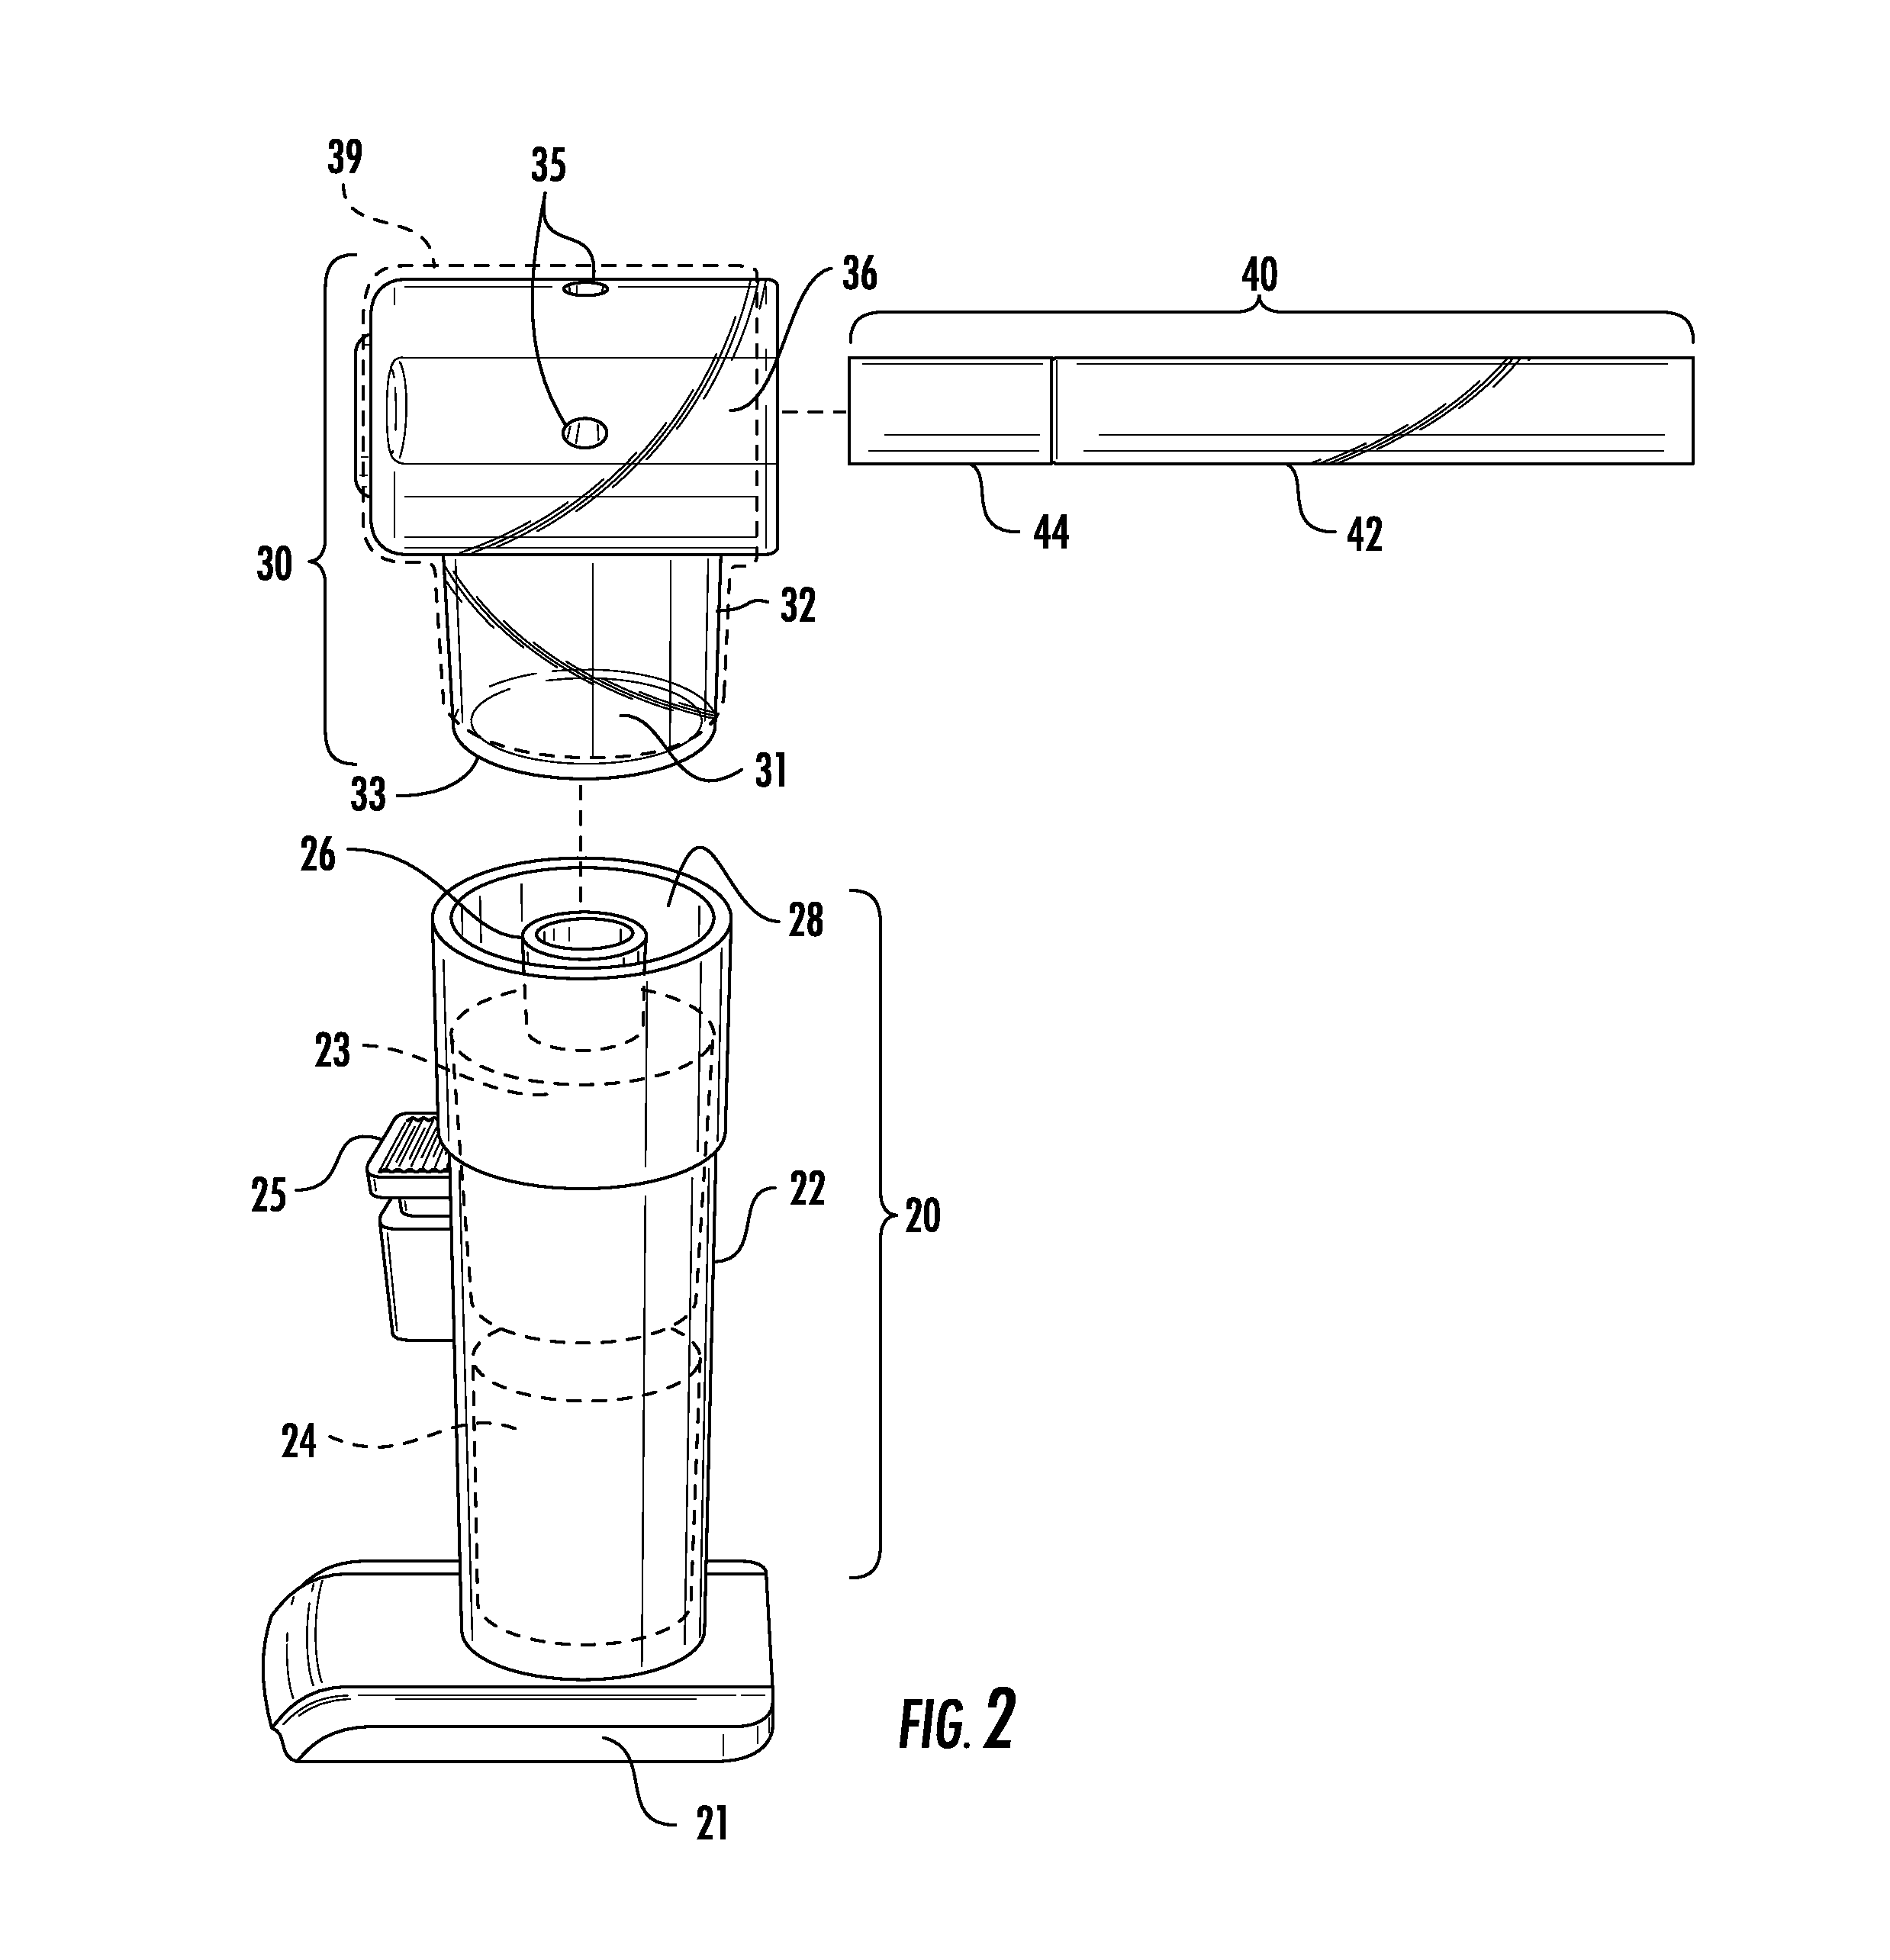 Substrates for vaporizing and delivering an aerosol agent